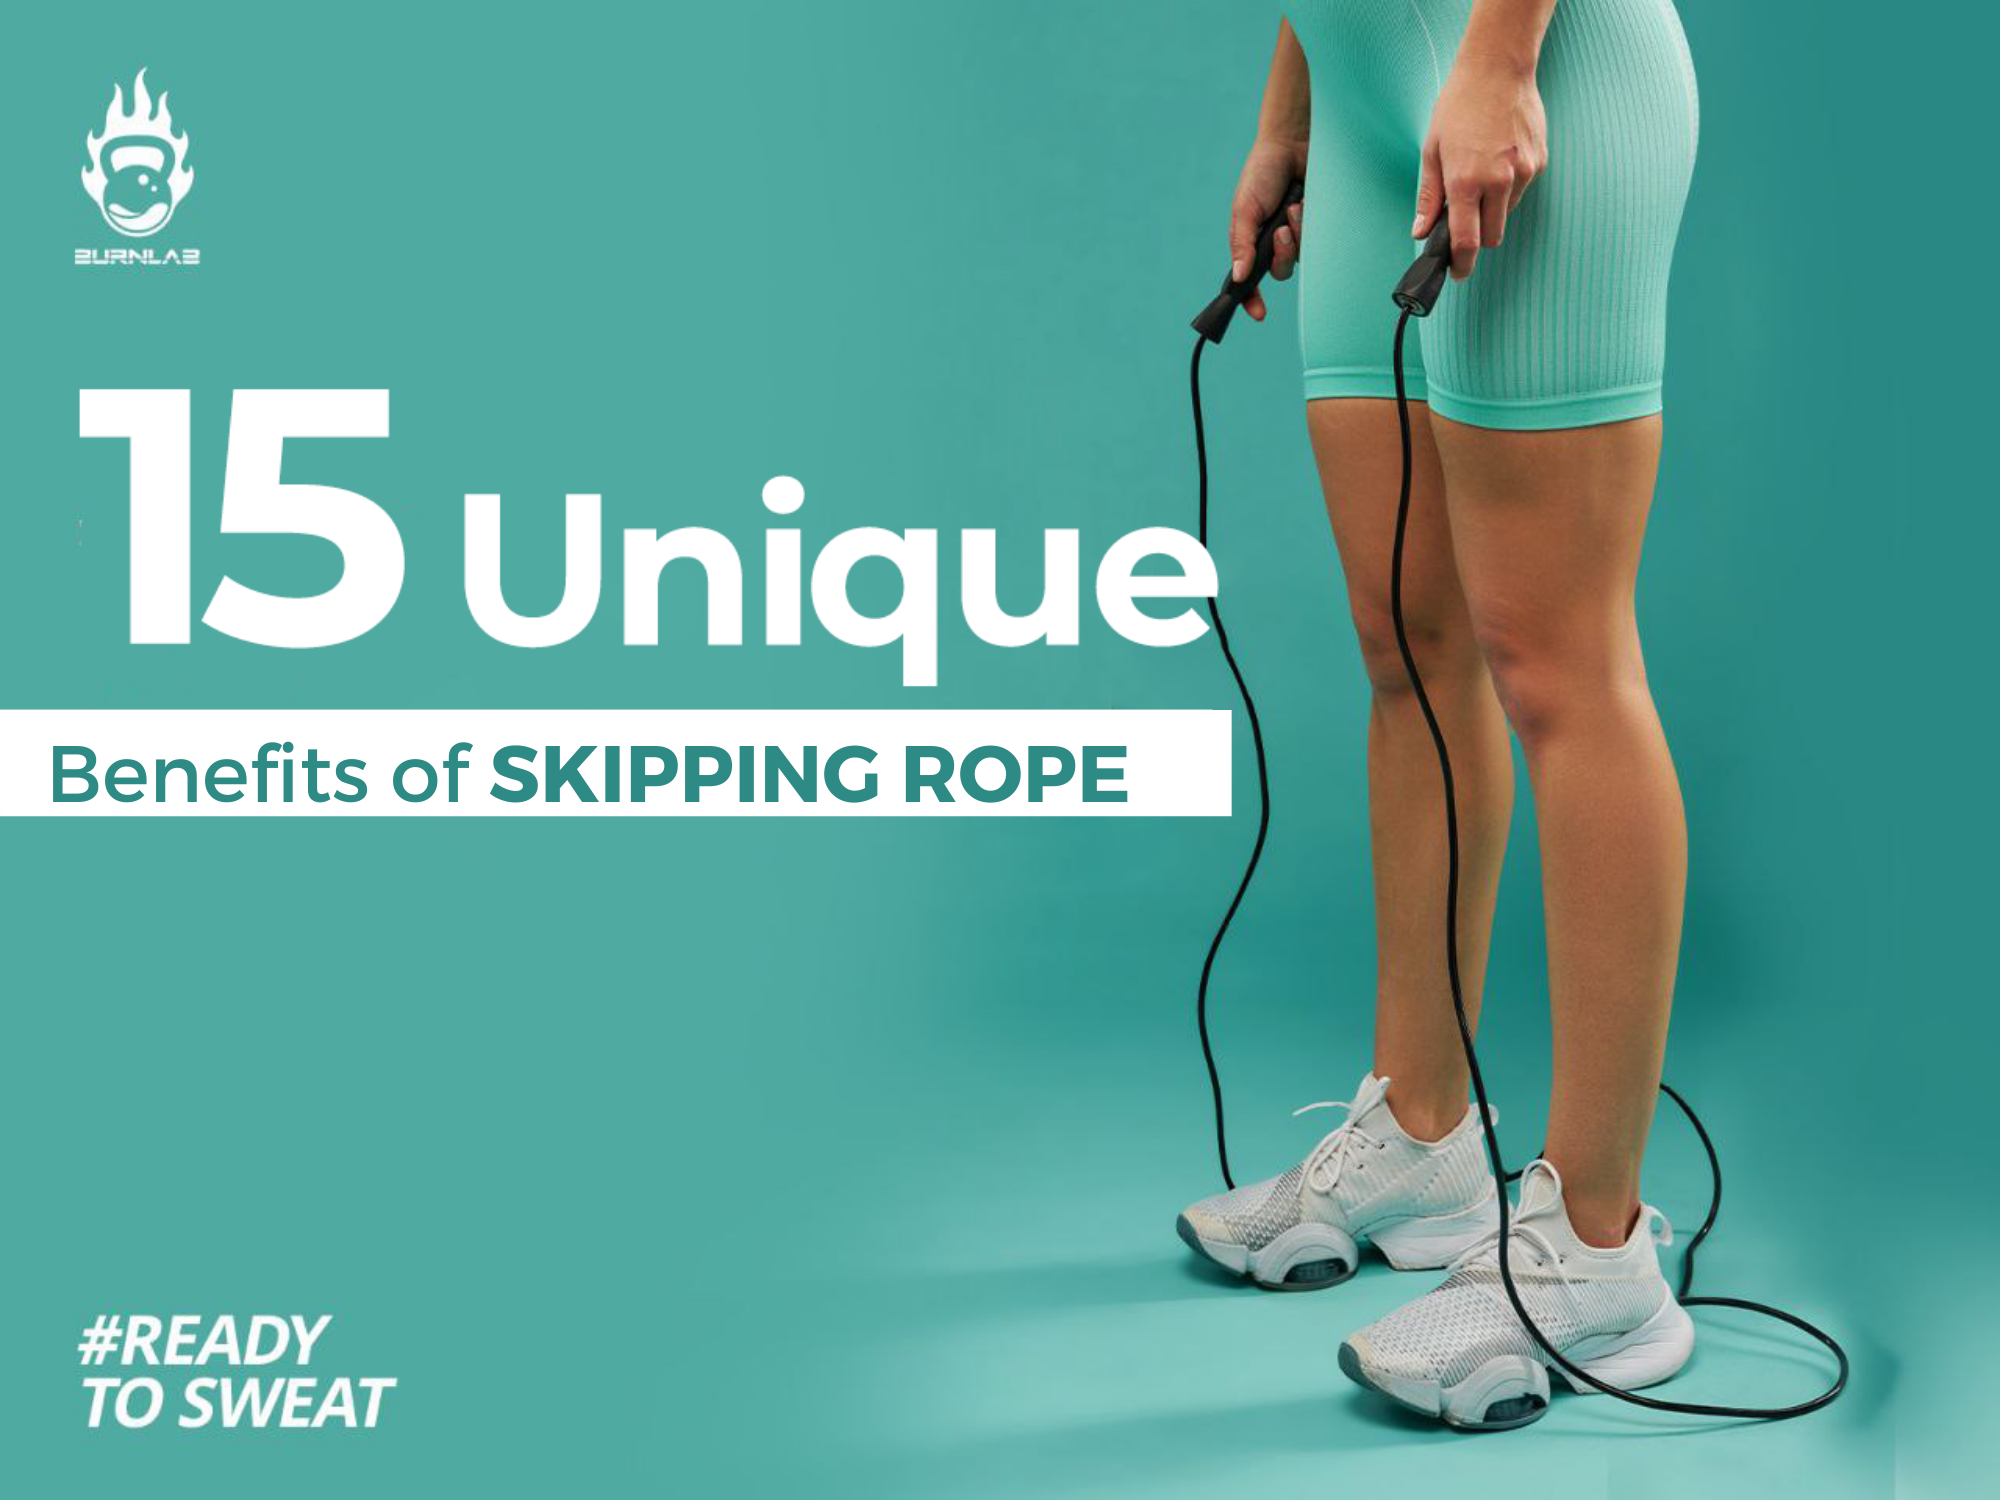 4 Reasons You Should Jump Rope For Exercise